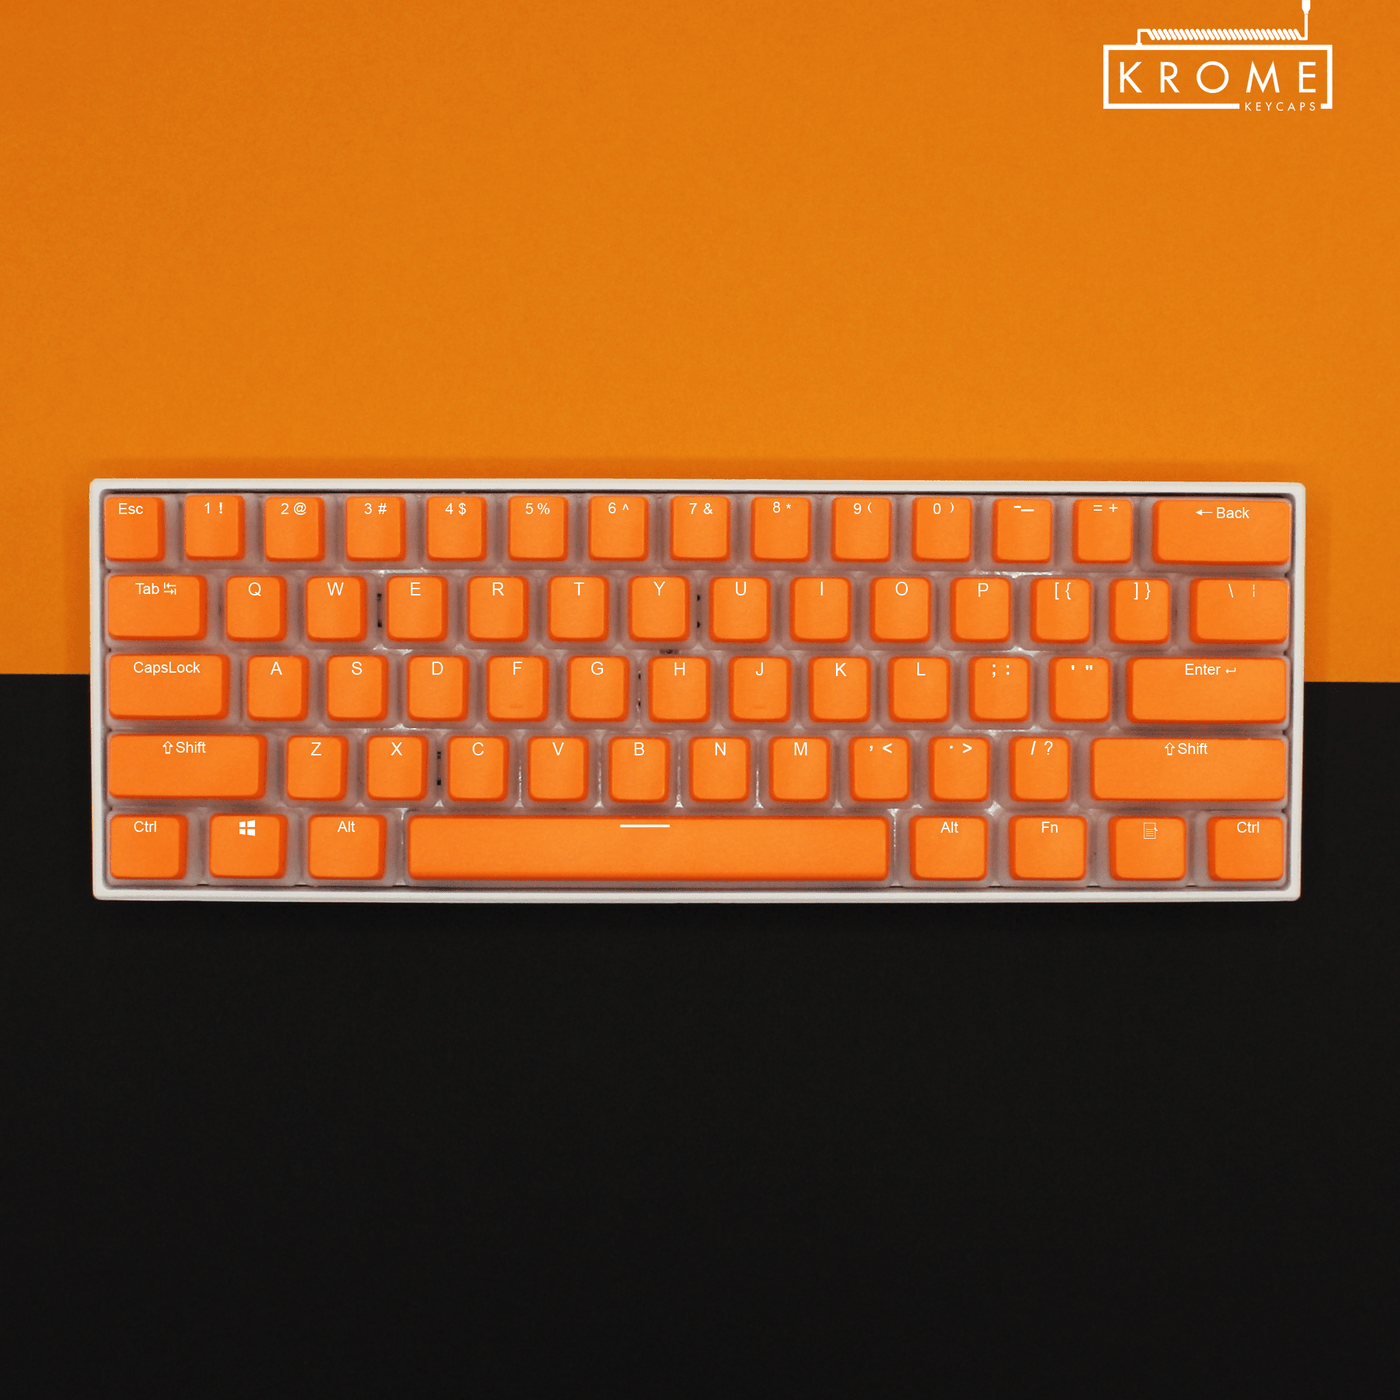 75% - ISO/ANSI - Create Your Own Pudding - Dual Colour Way - kromekeycaps